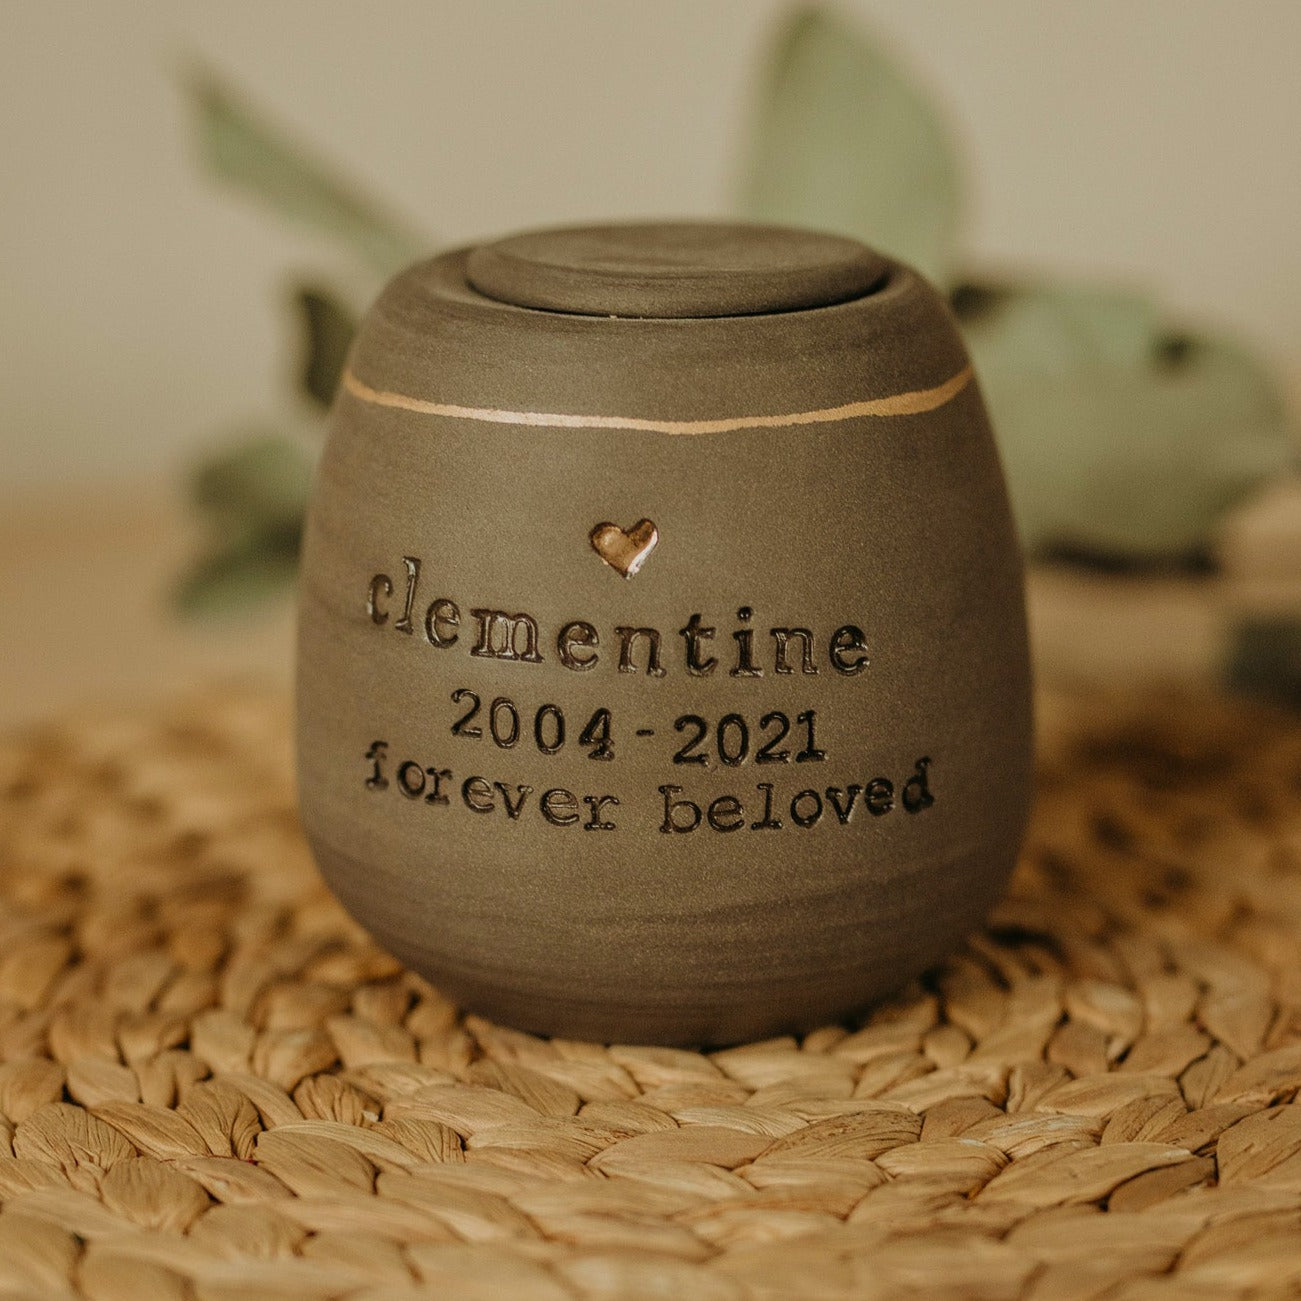 Personalized dog memorial urn - artisan-crafted - lasting tribute for your beloved companion.